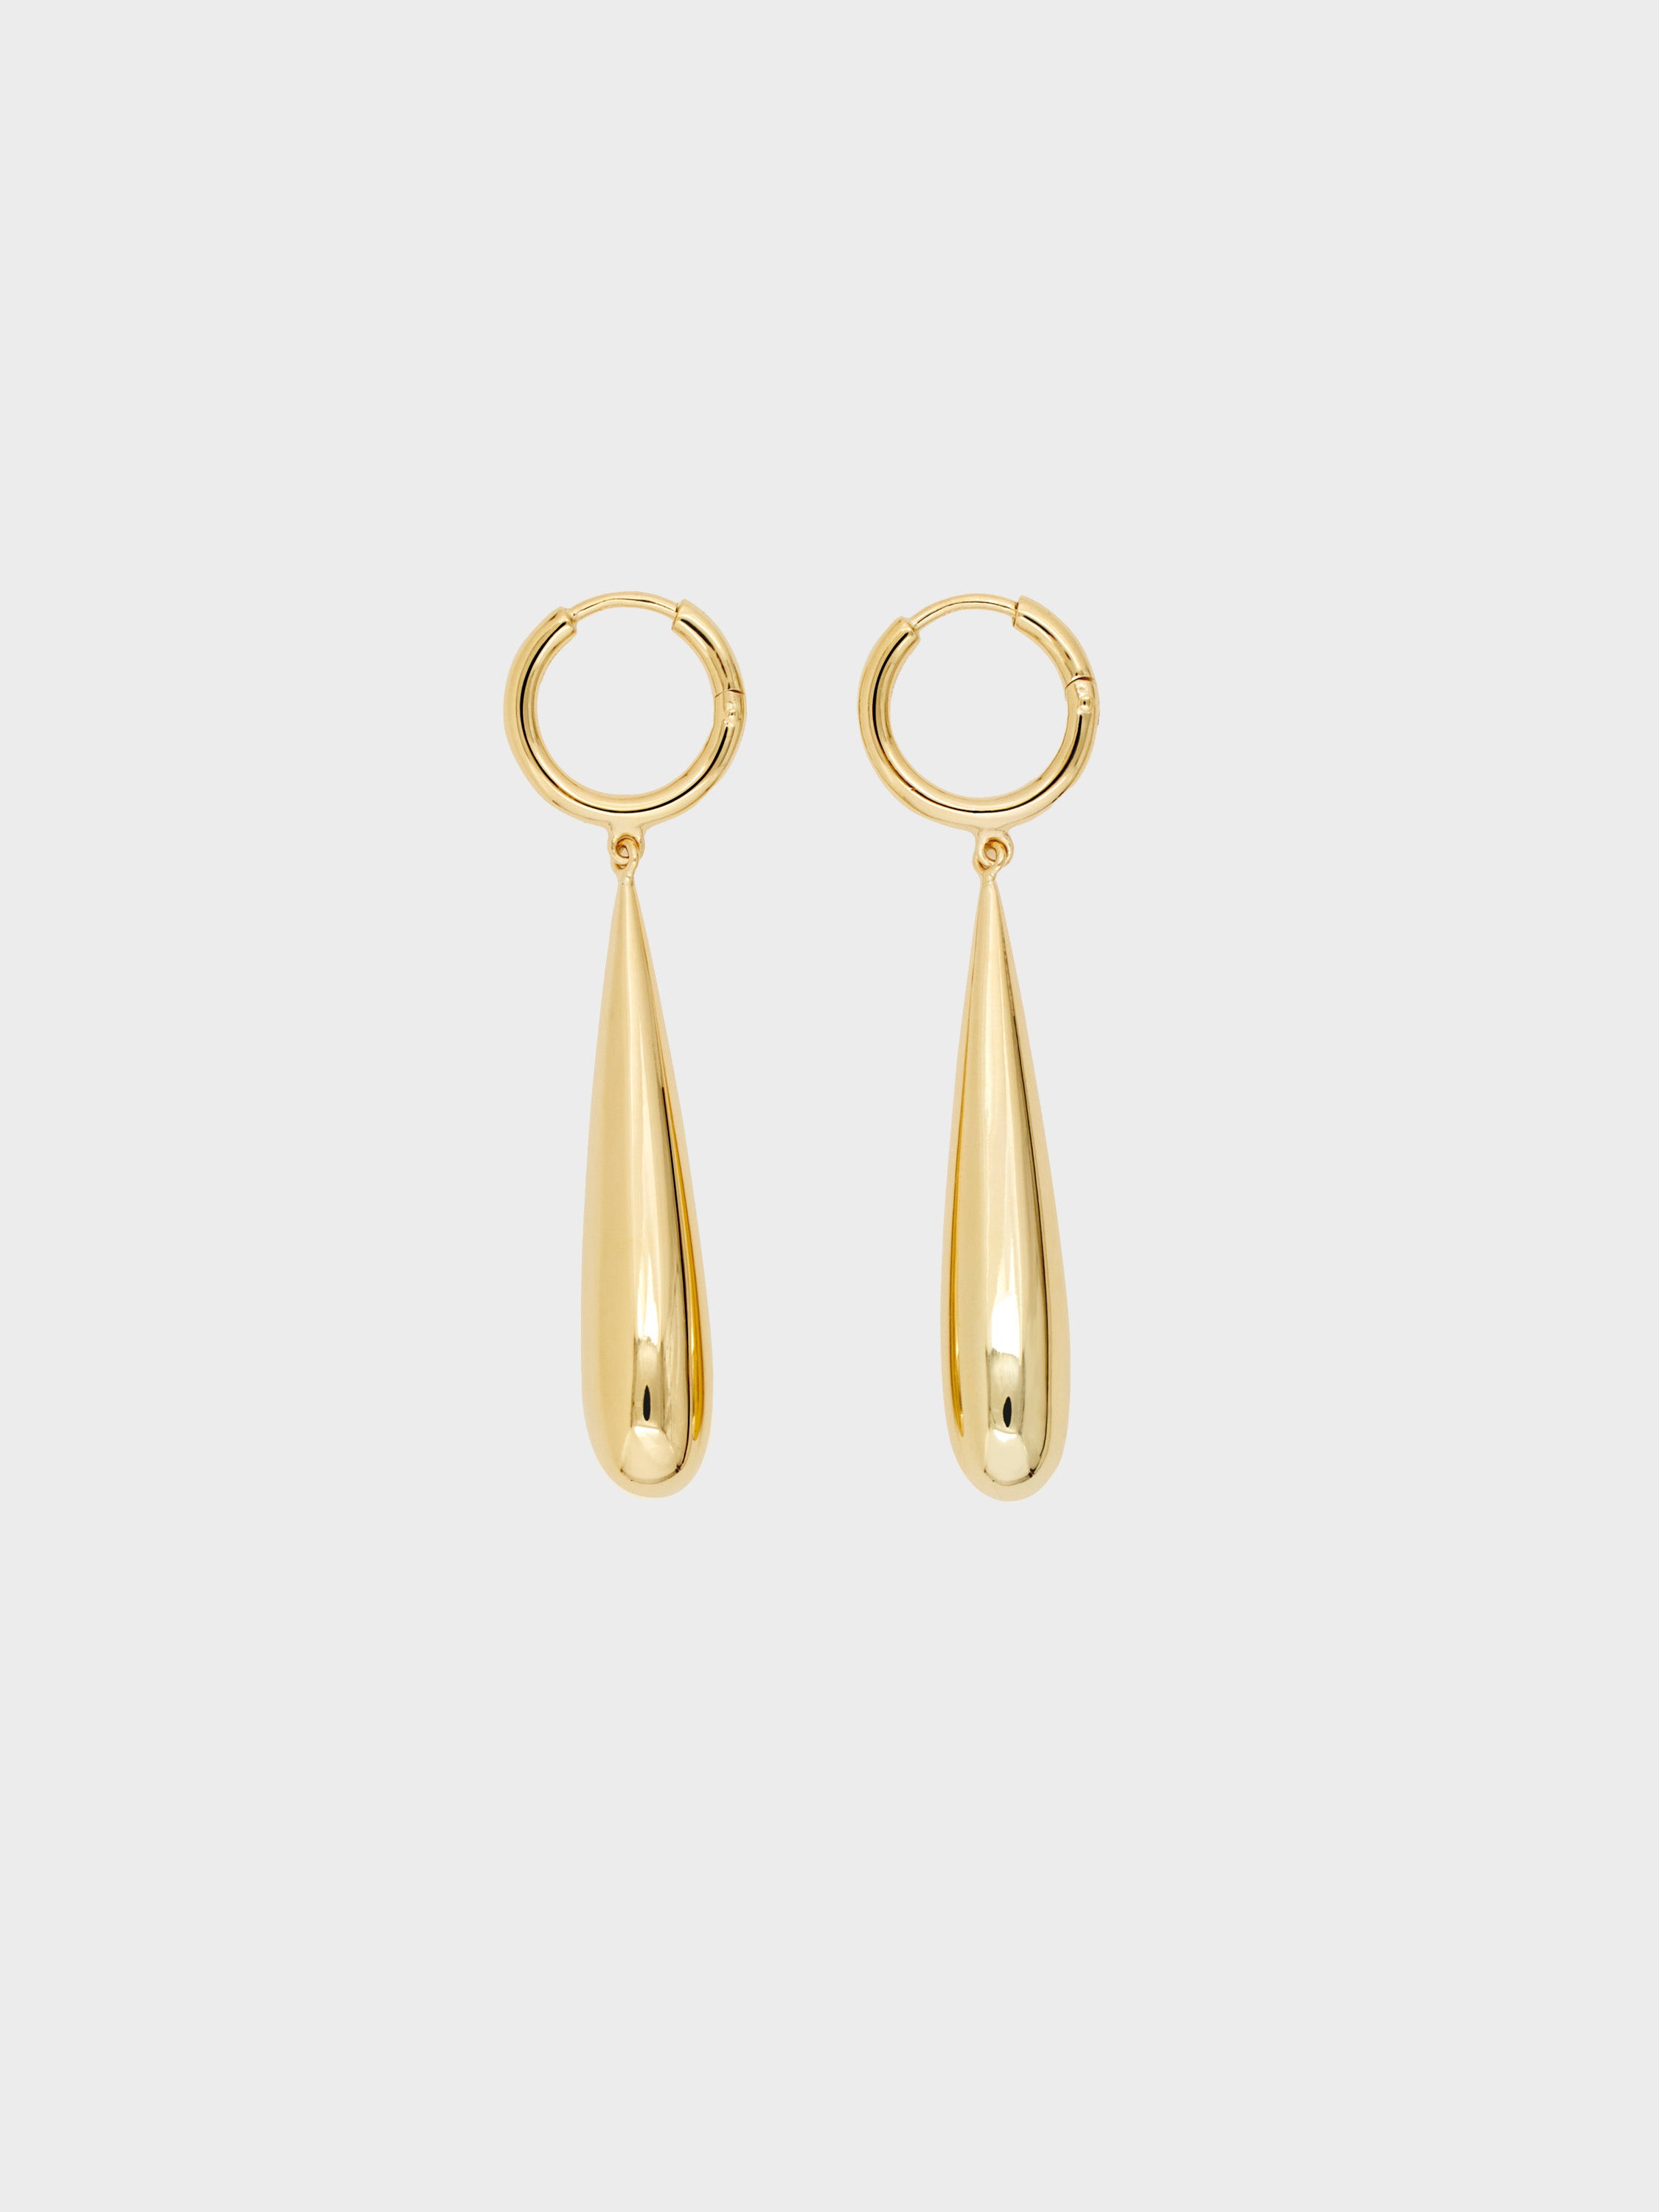 Ragbag - No. 12079 Earrings with Gold Plating